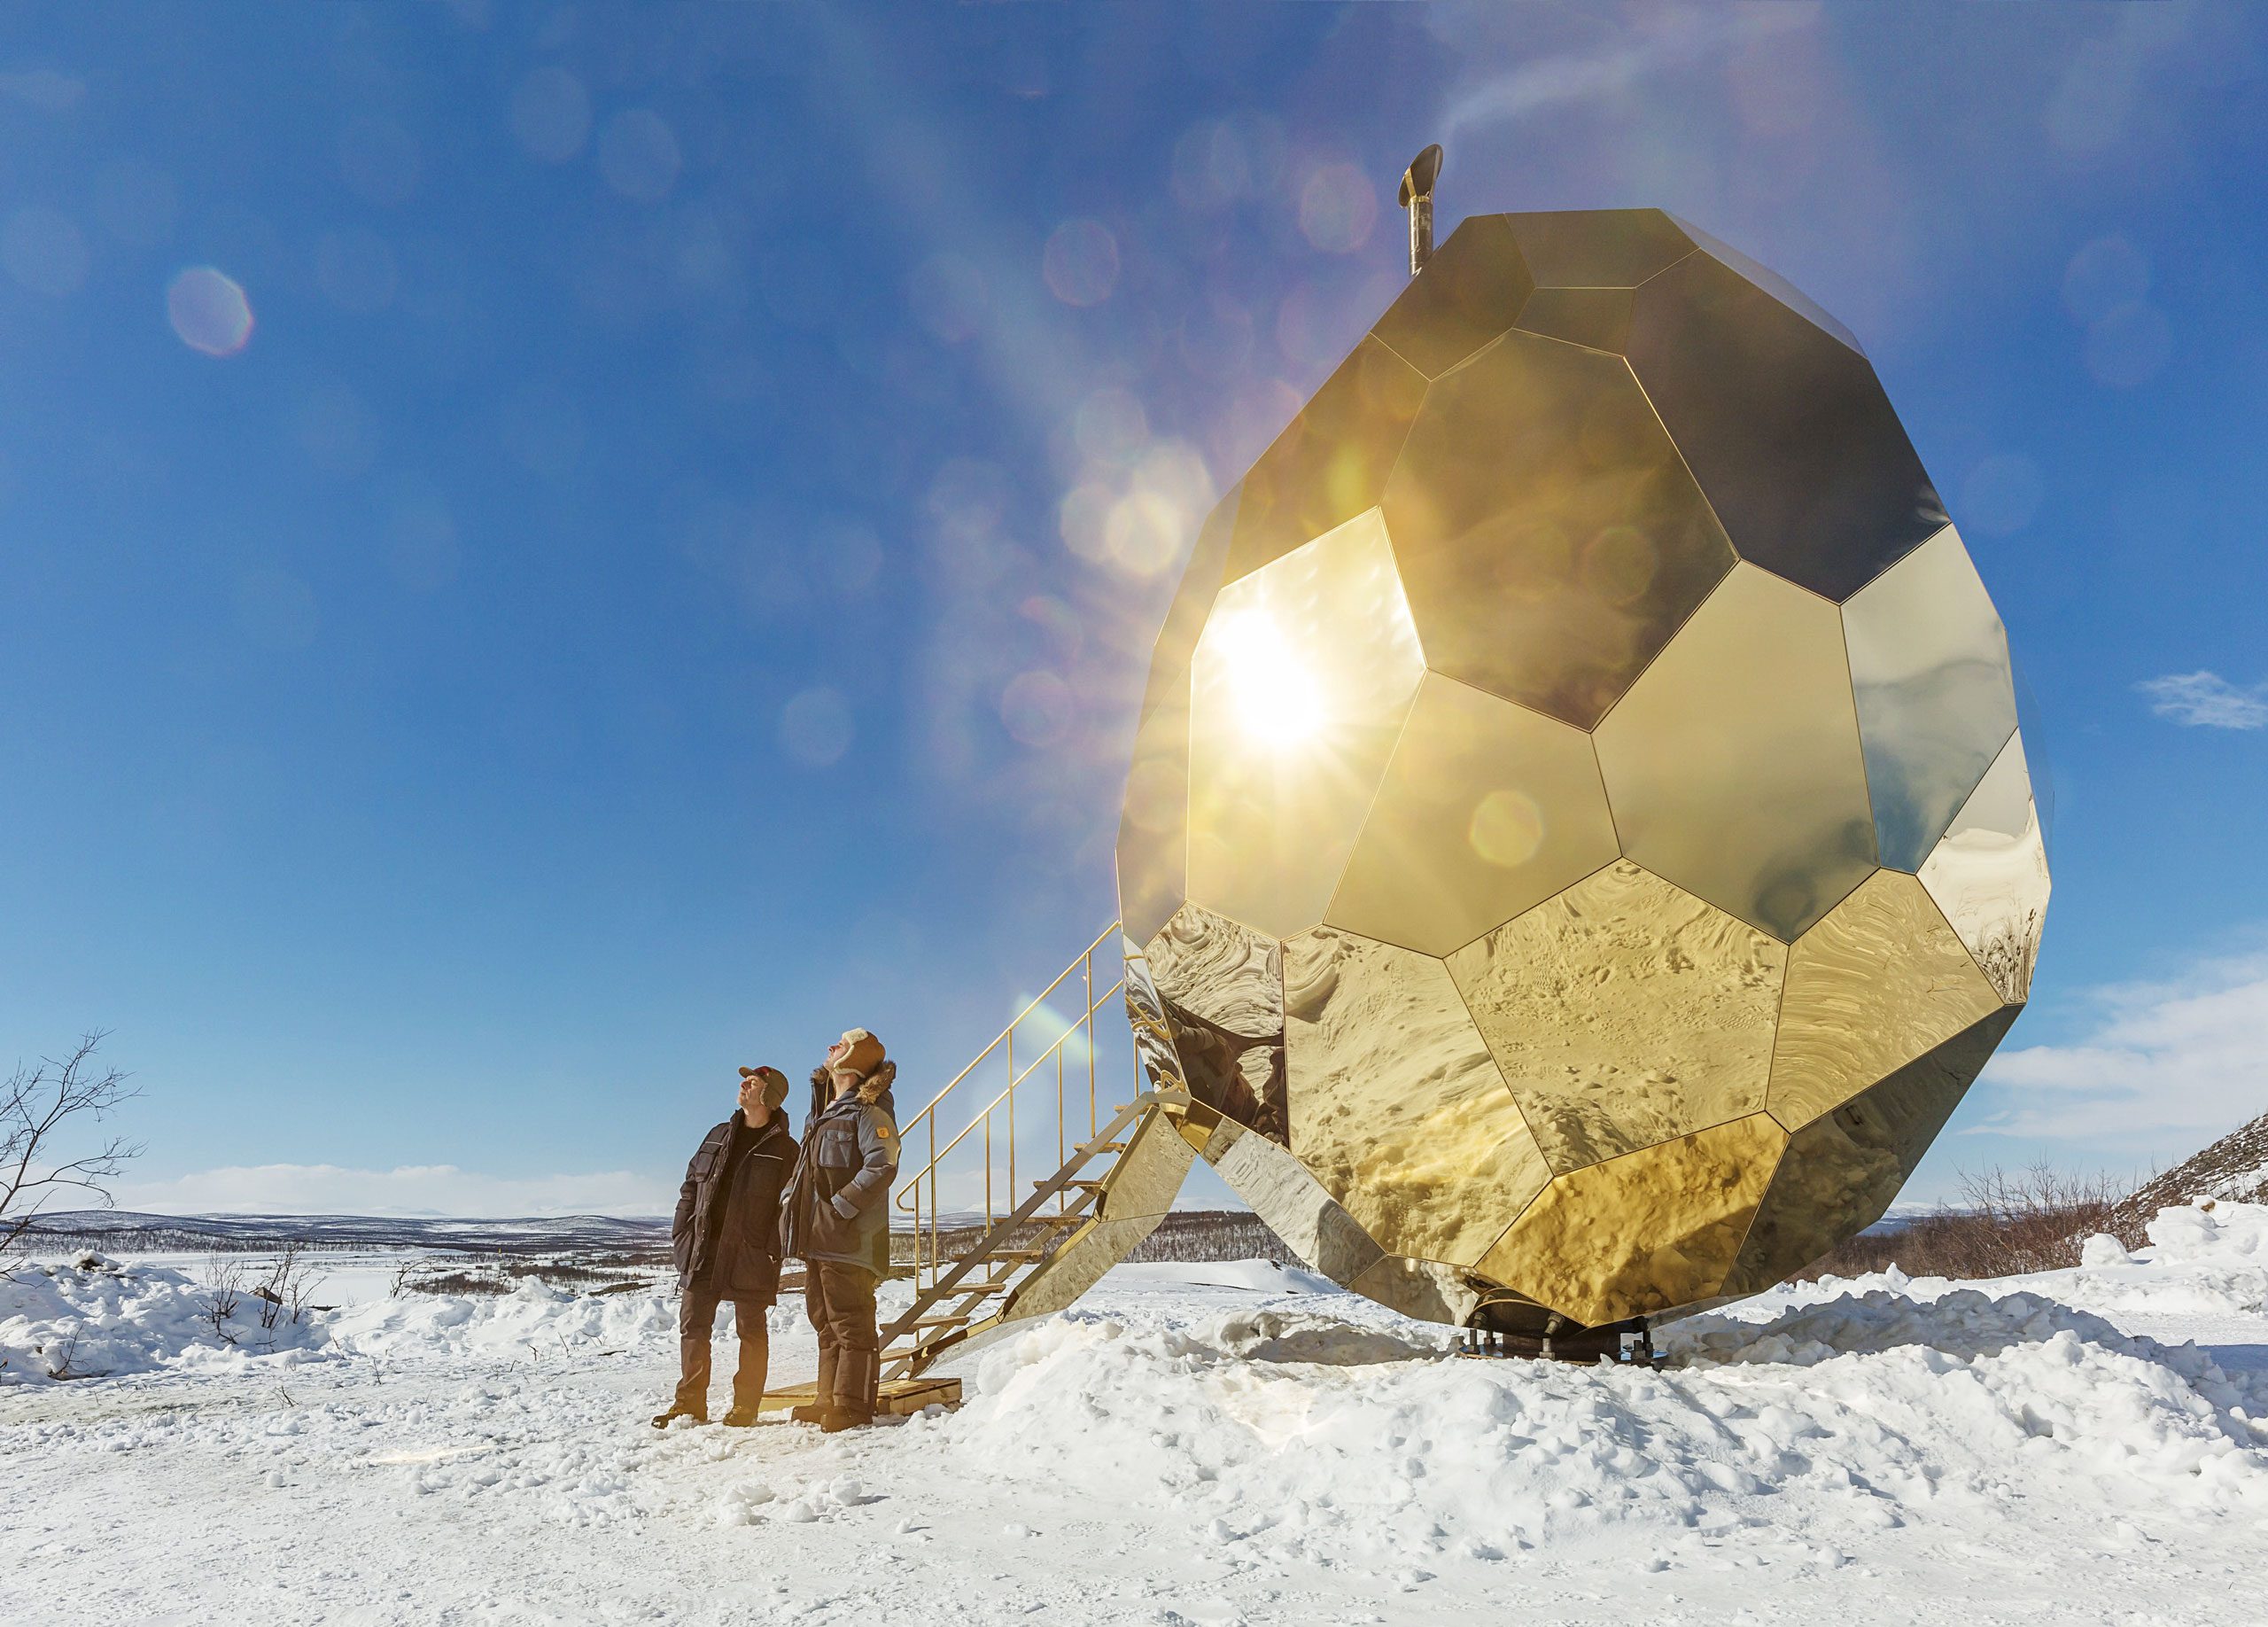 Riksbyggen is commemorating the start of Kiruna’s urban transformation project by opening SOLAR EGG, a public sauna art installation by prizewinning artistic duo Bigert &amp; Bergström, to the city and its inhabitants. (Jean-Baptiste Béranger)